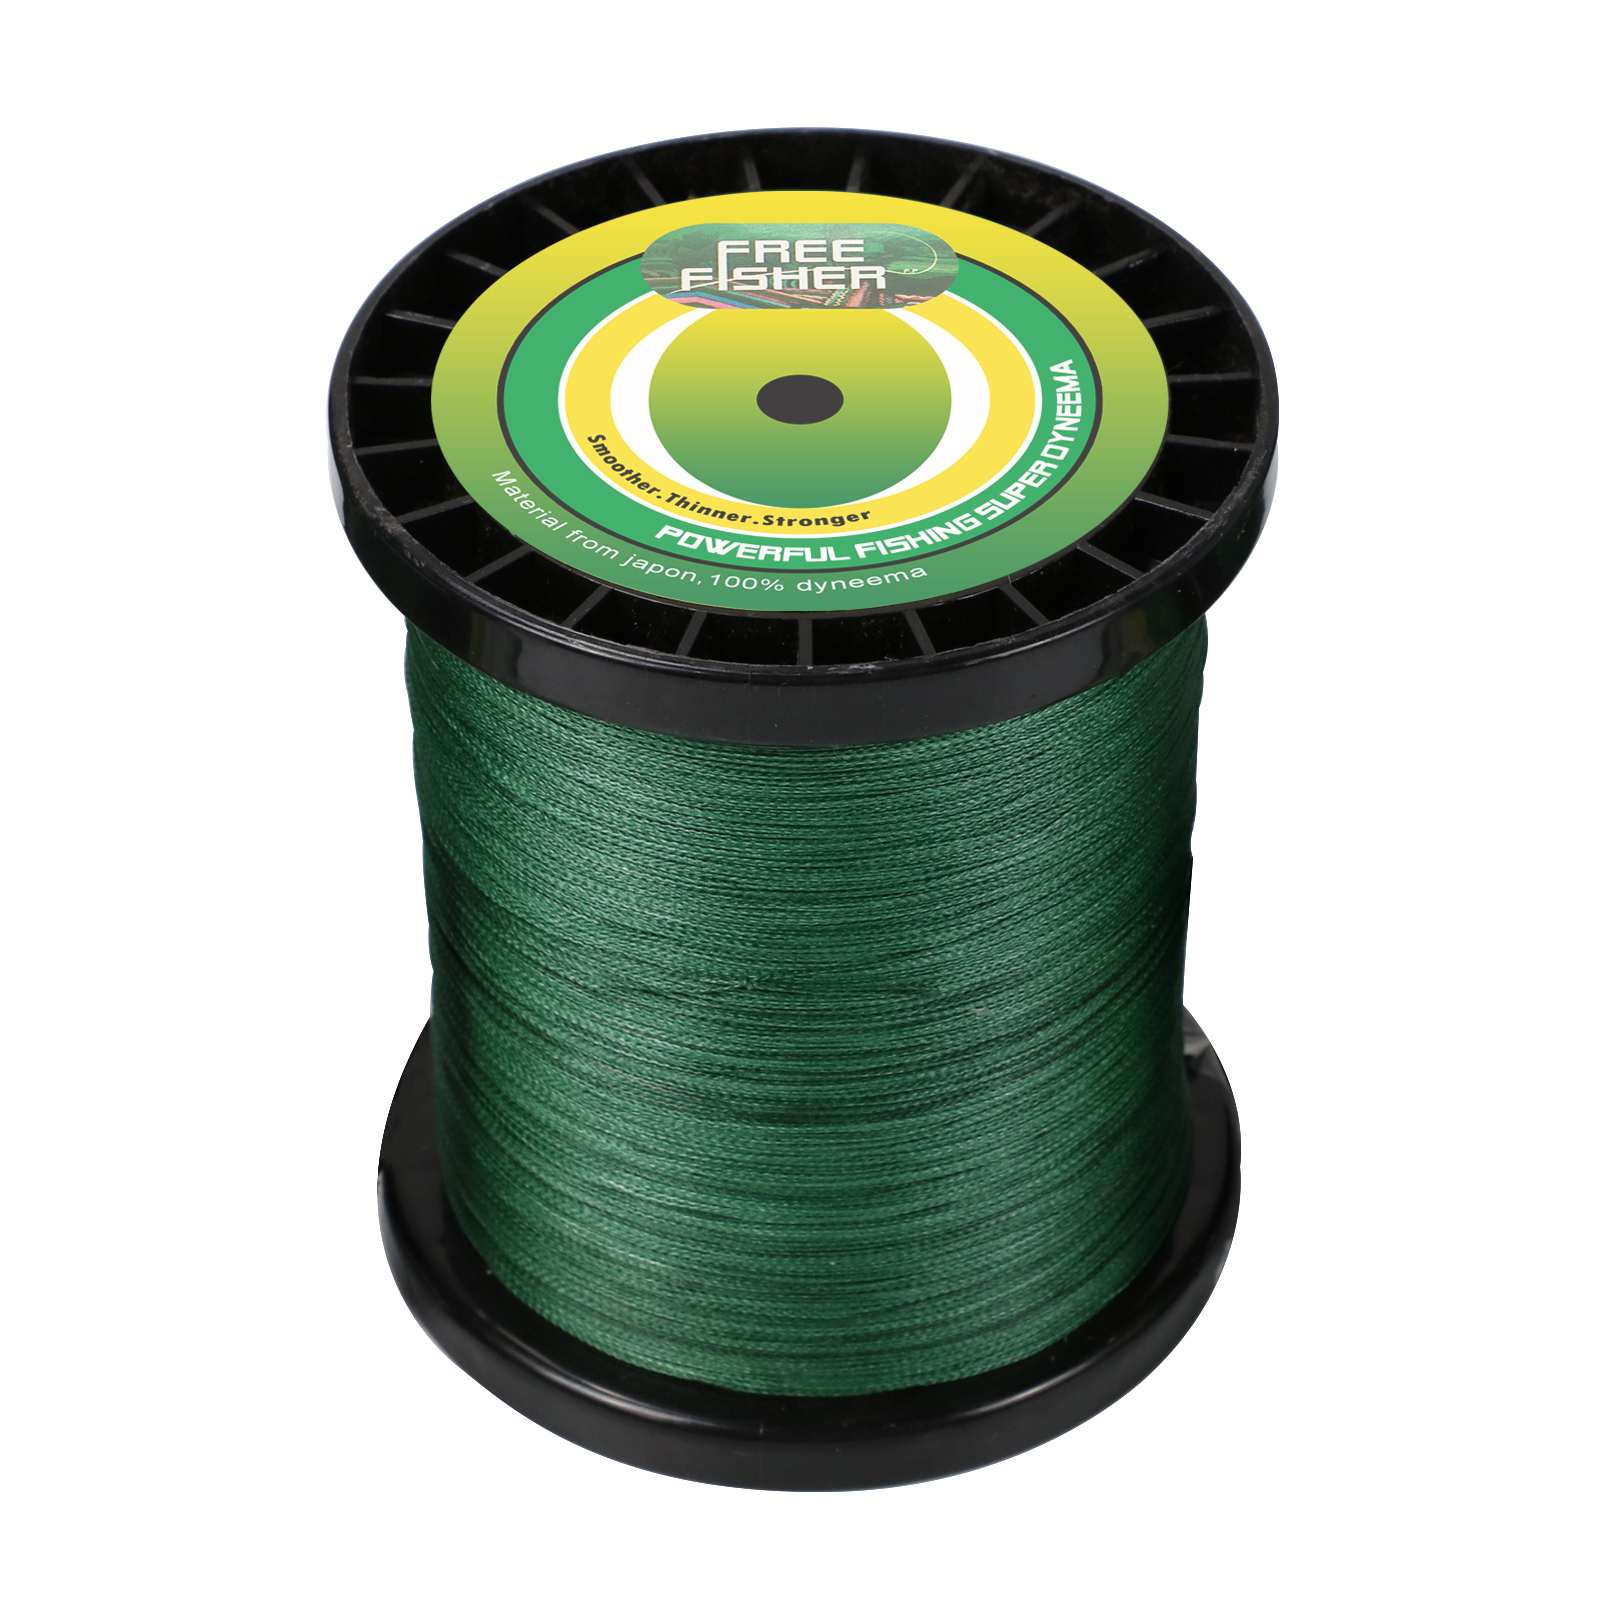 FREE FISHER Fishing Line 4 Strands 1500M Braided Line 20LB/30LB/40LB/50LB Super 100% PE Multifilament Braid Wire for Saltwater/Freshwater